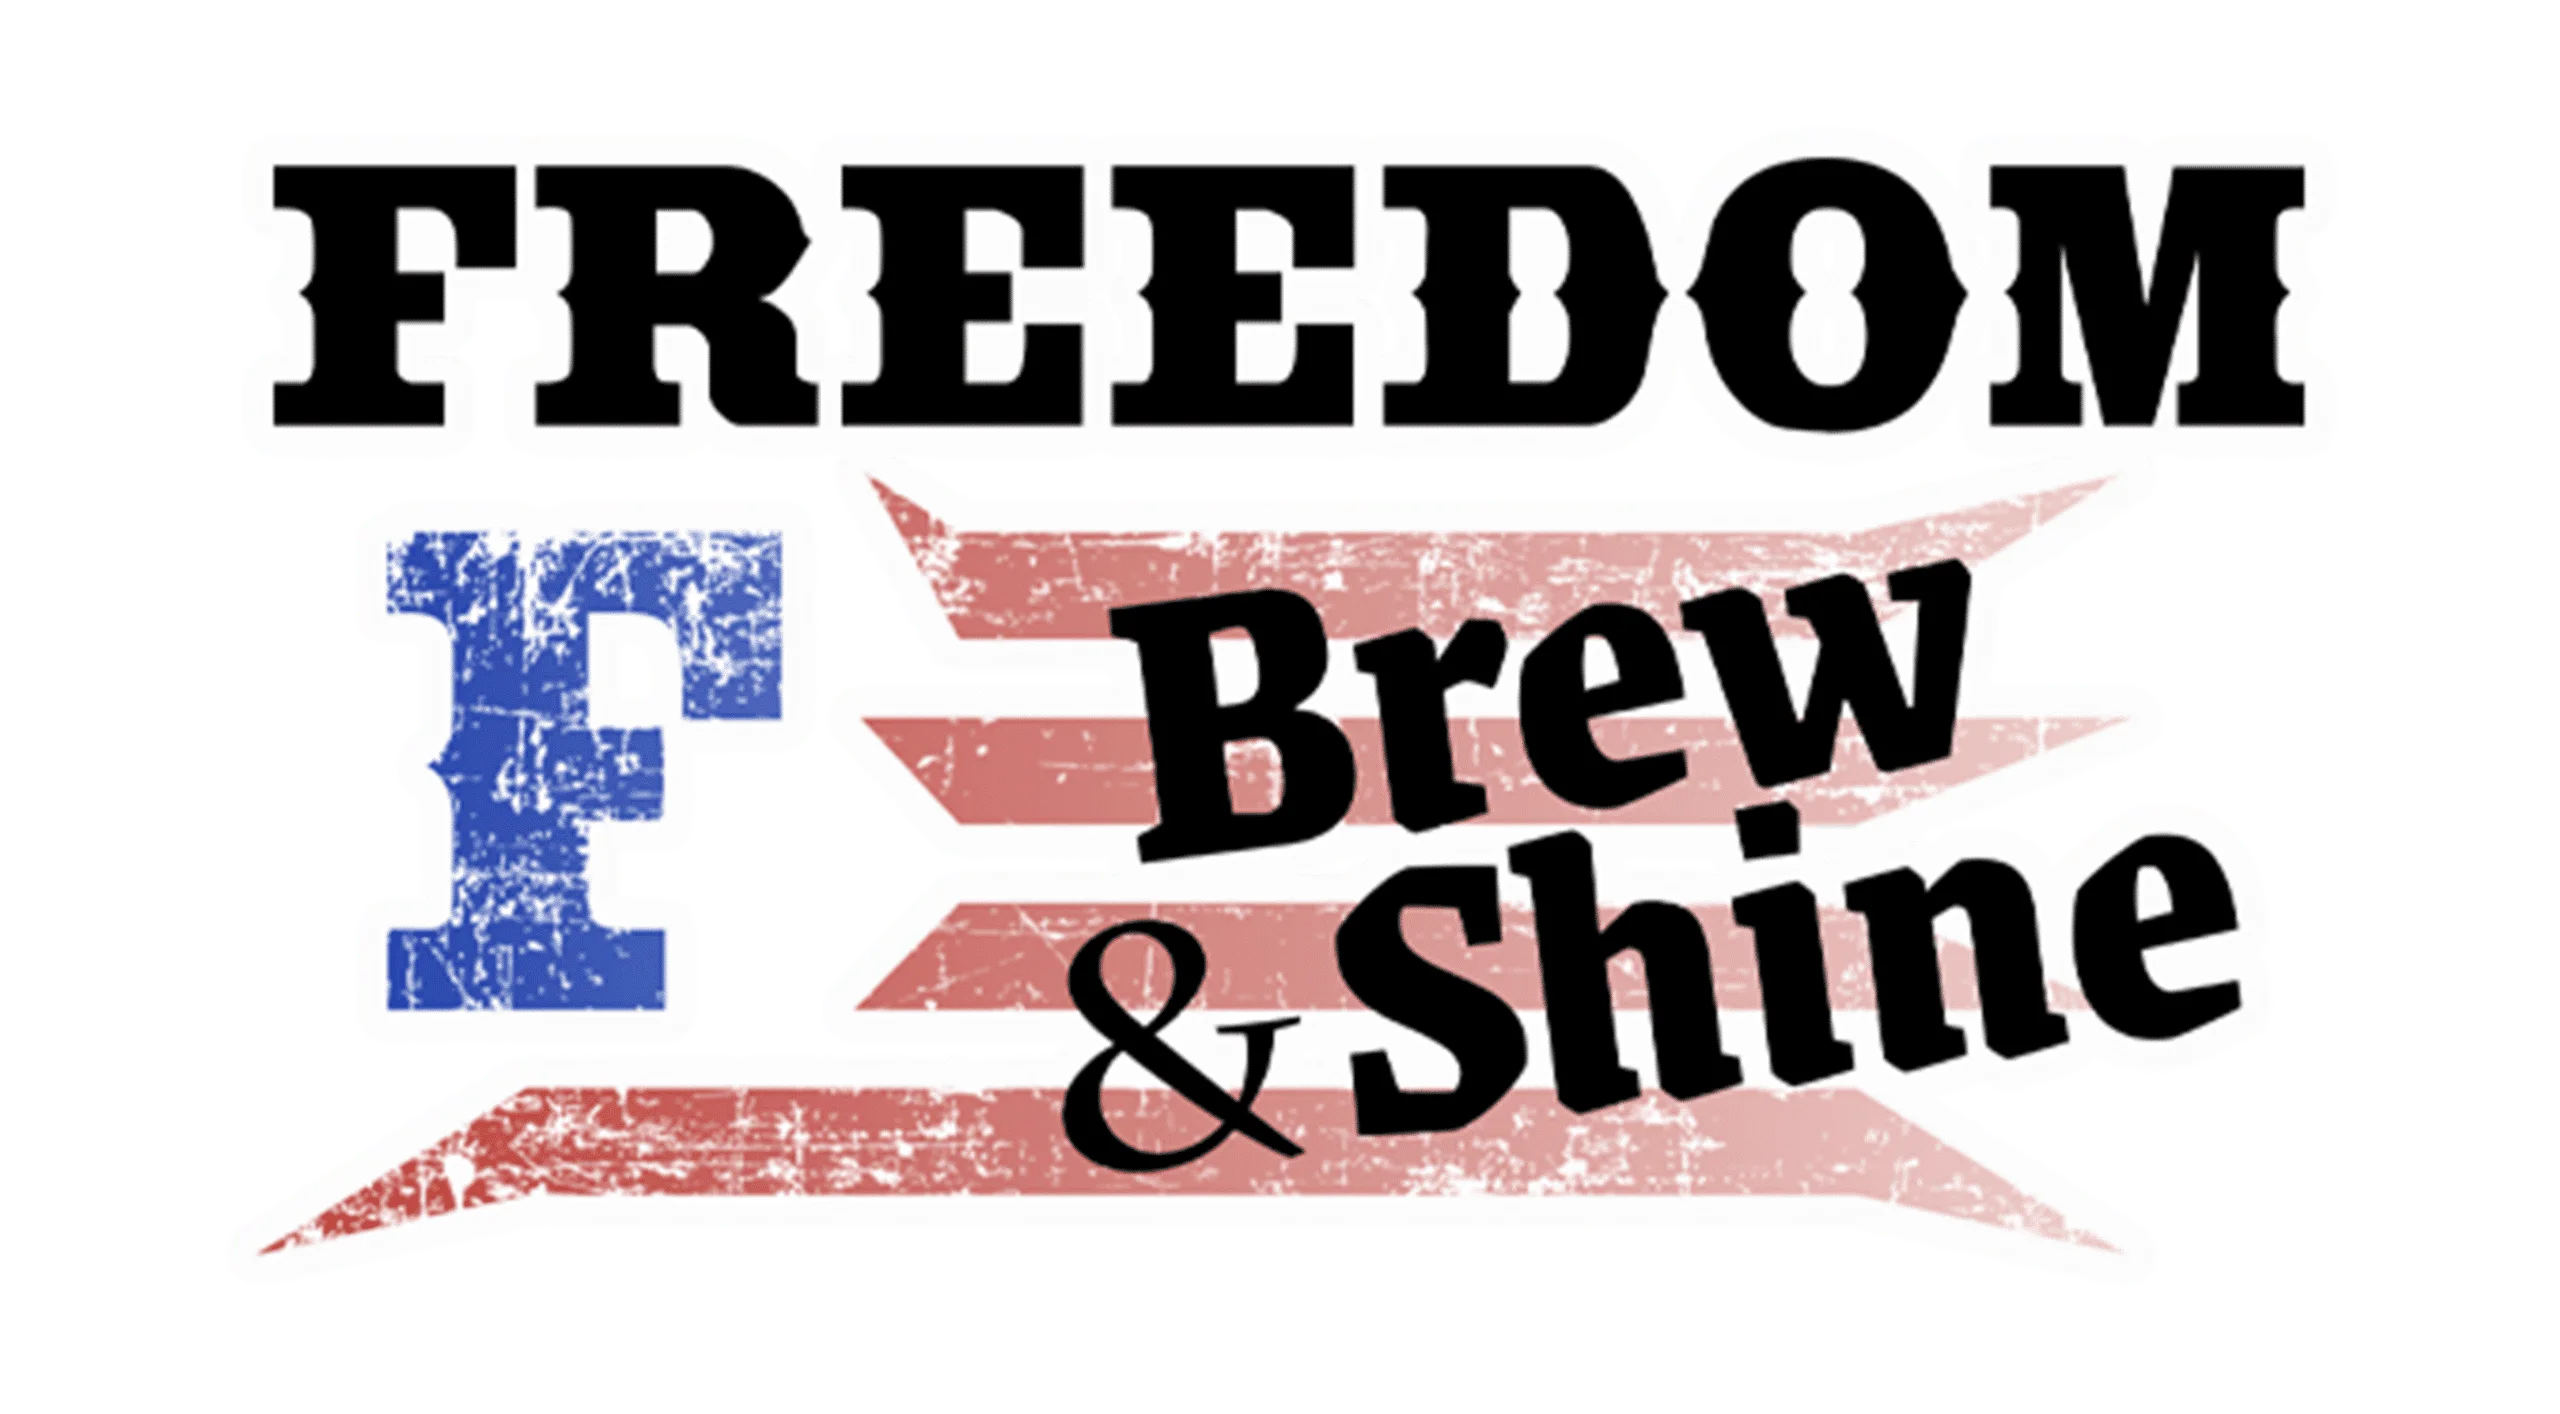 freedom brew and shine - craft brewery